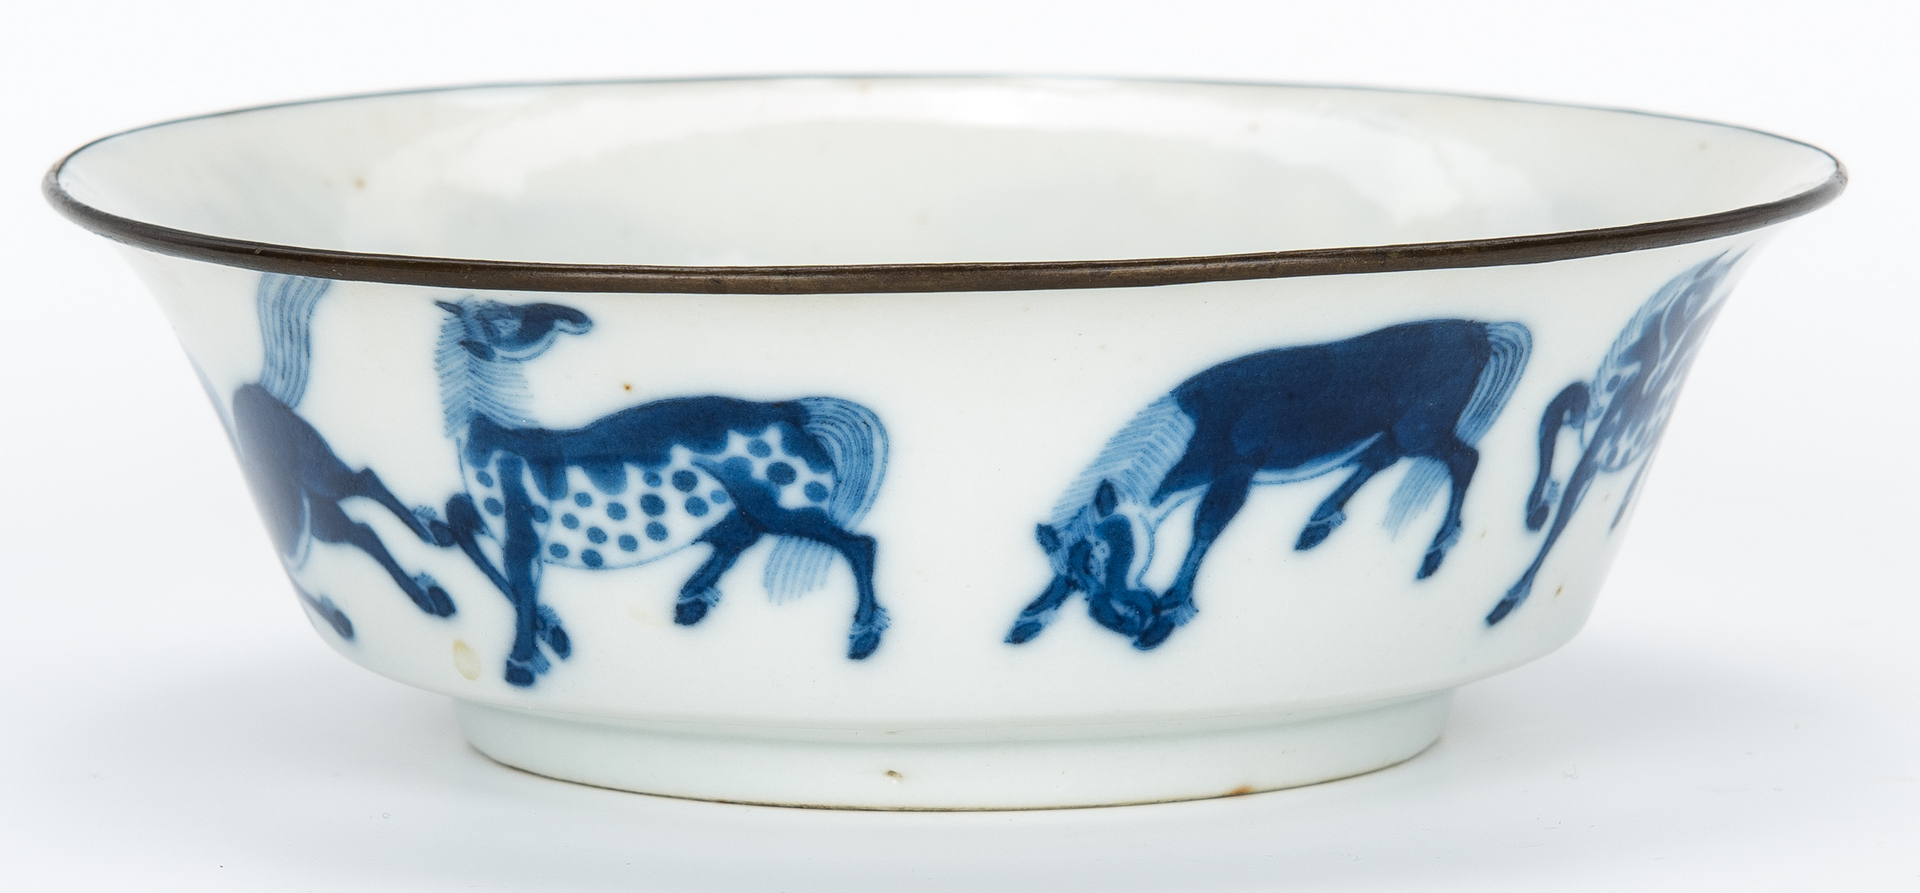 Lot 8: Chinese Porcelain Pillows and Bowl